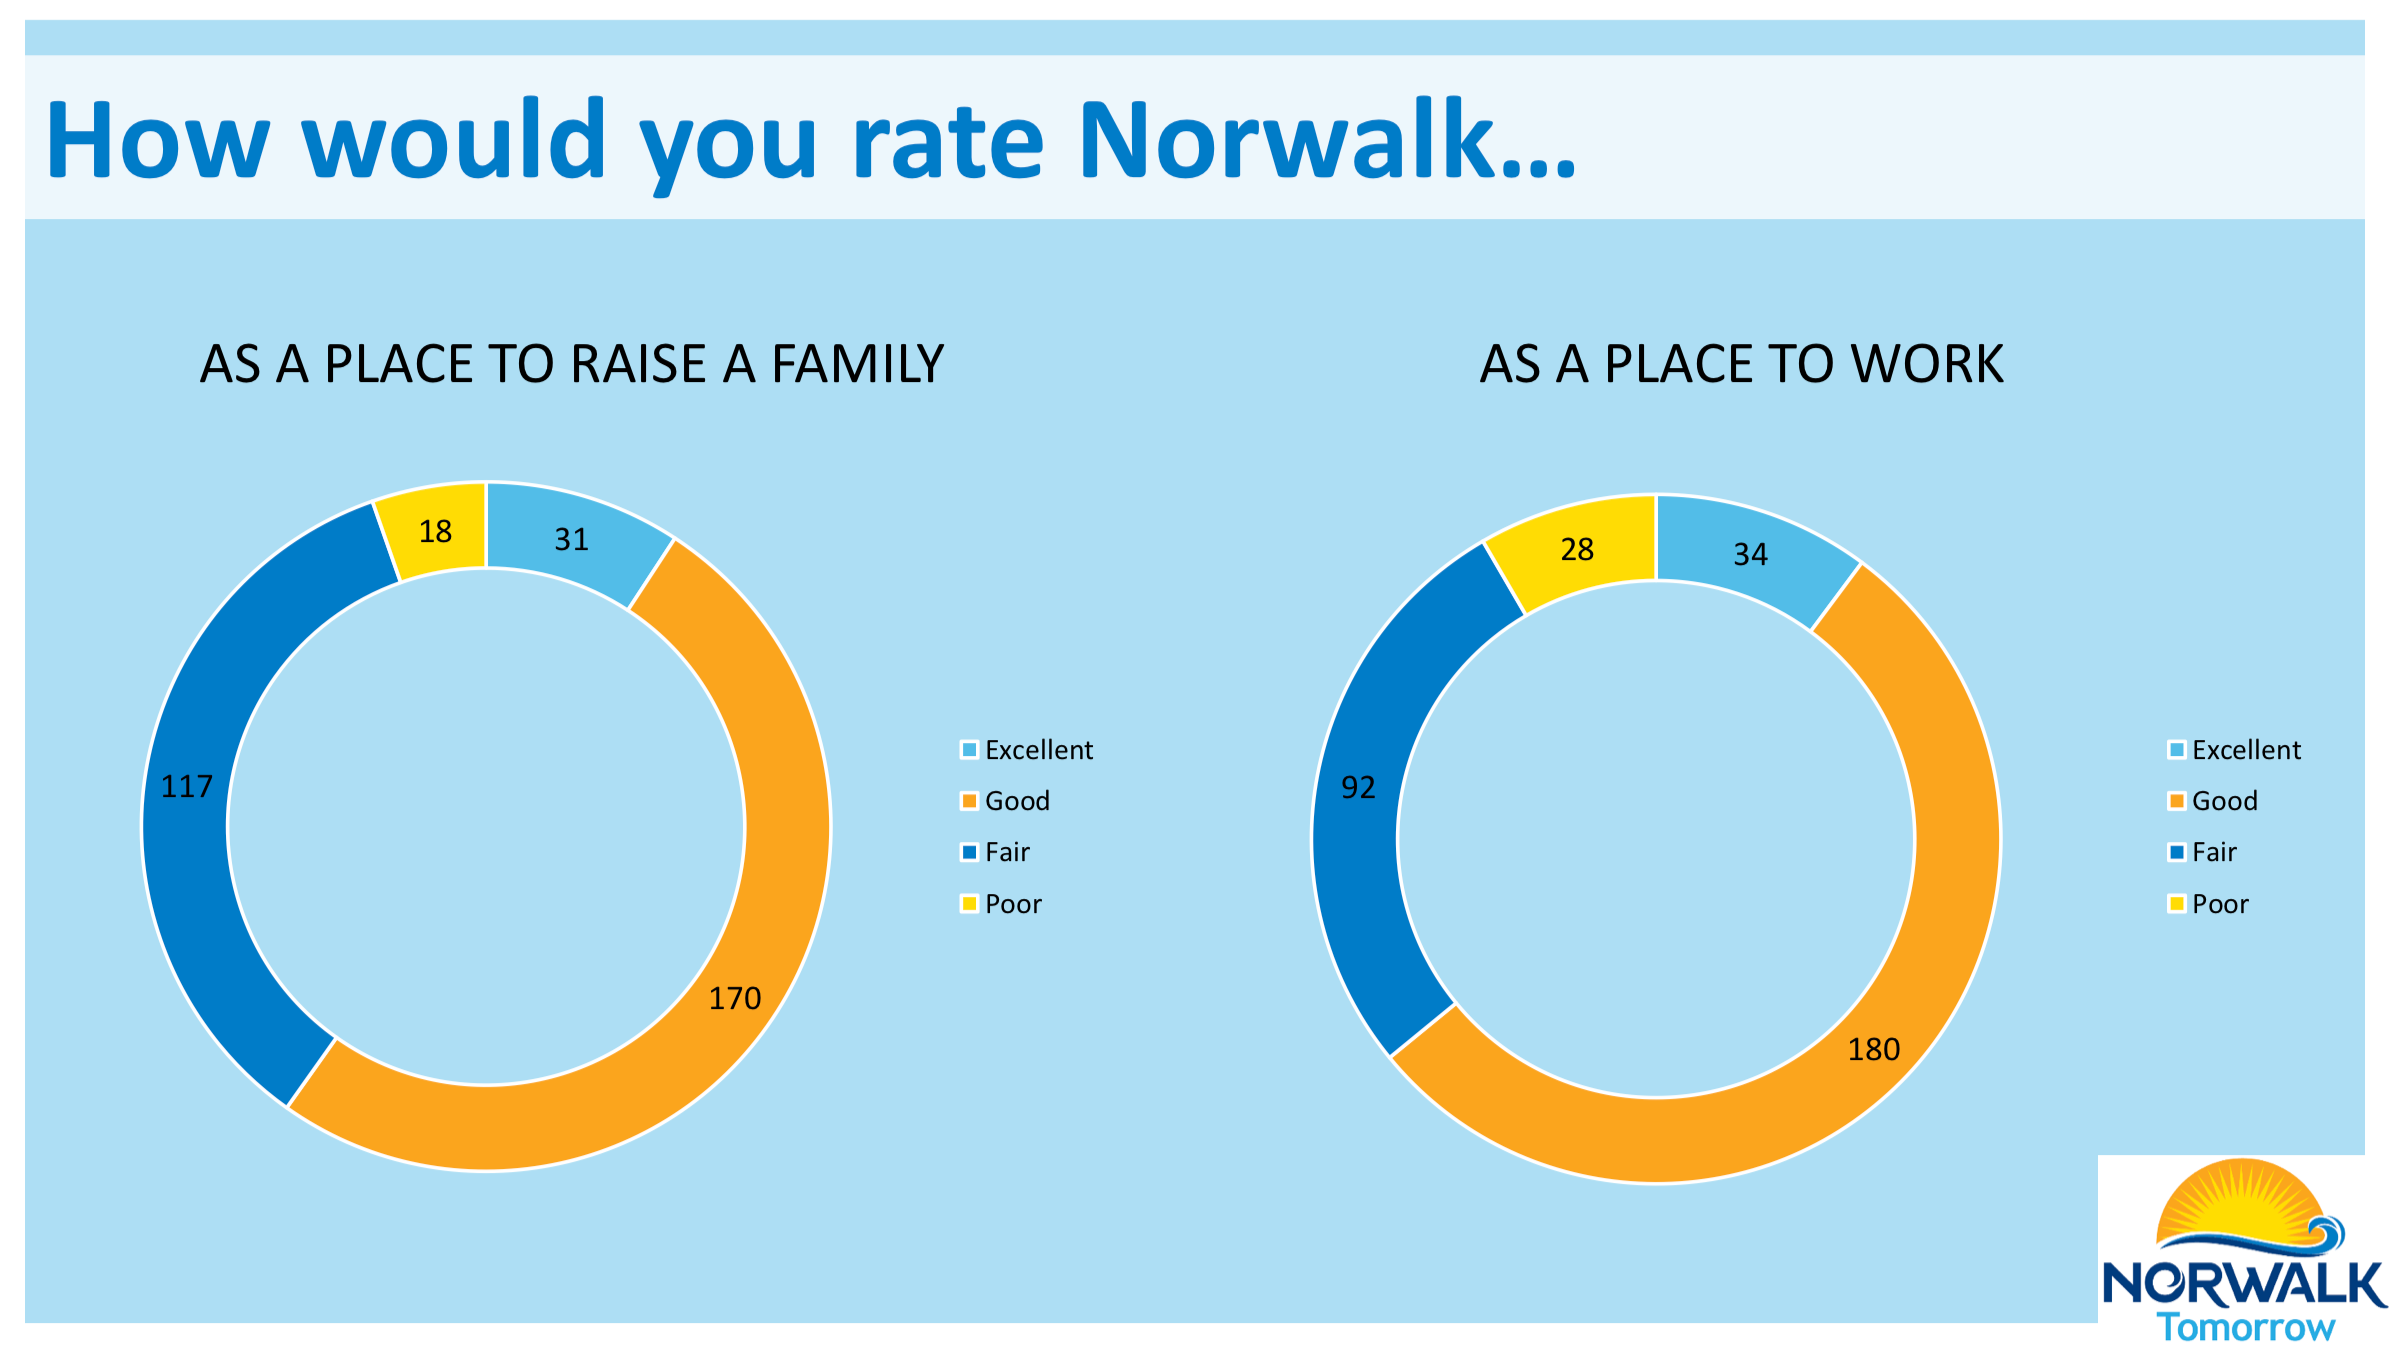 Pie charts results of "how you rate Norwalk" as place to raise family and to work